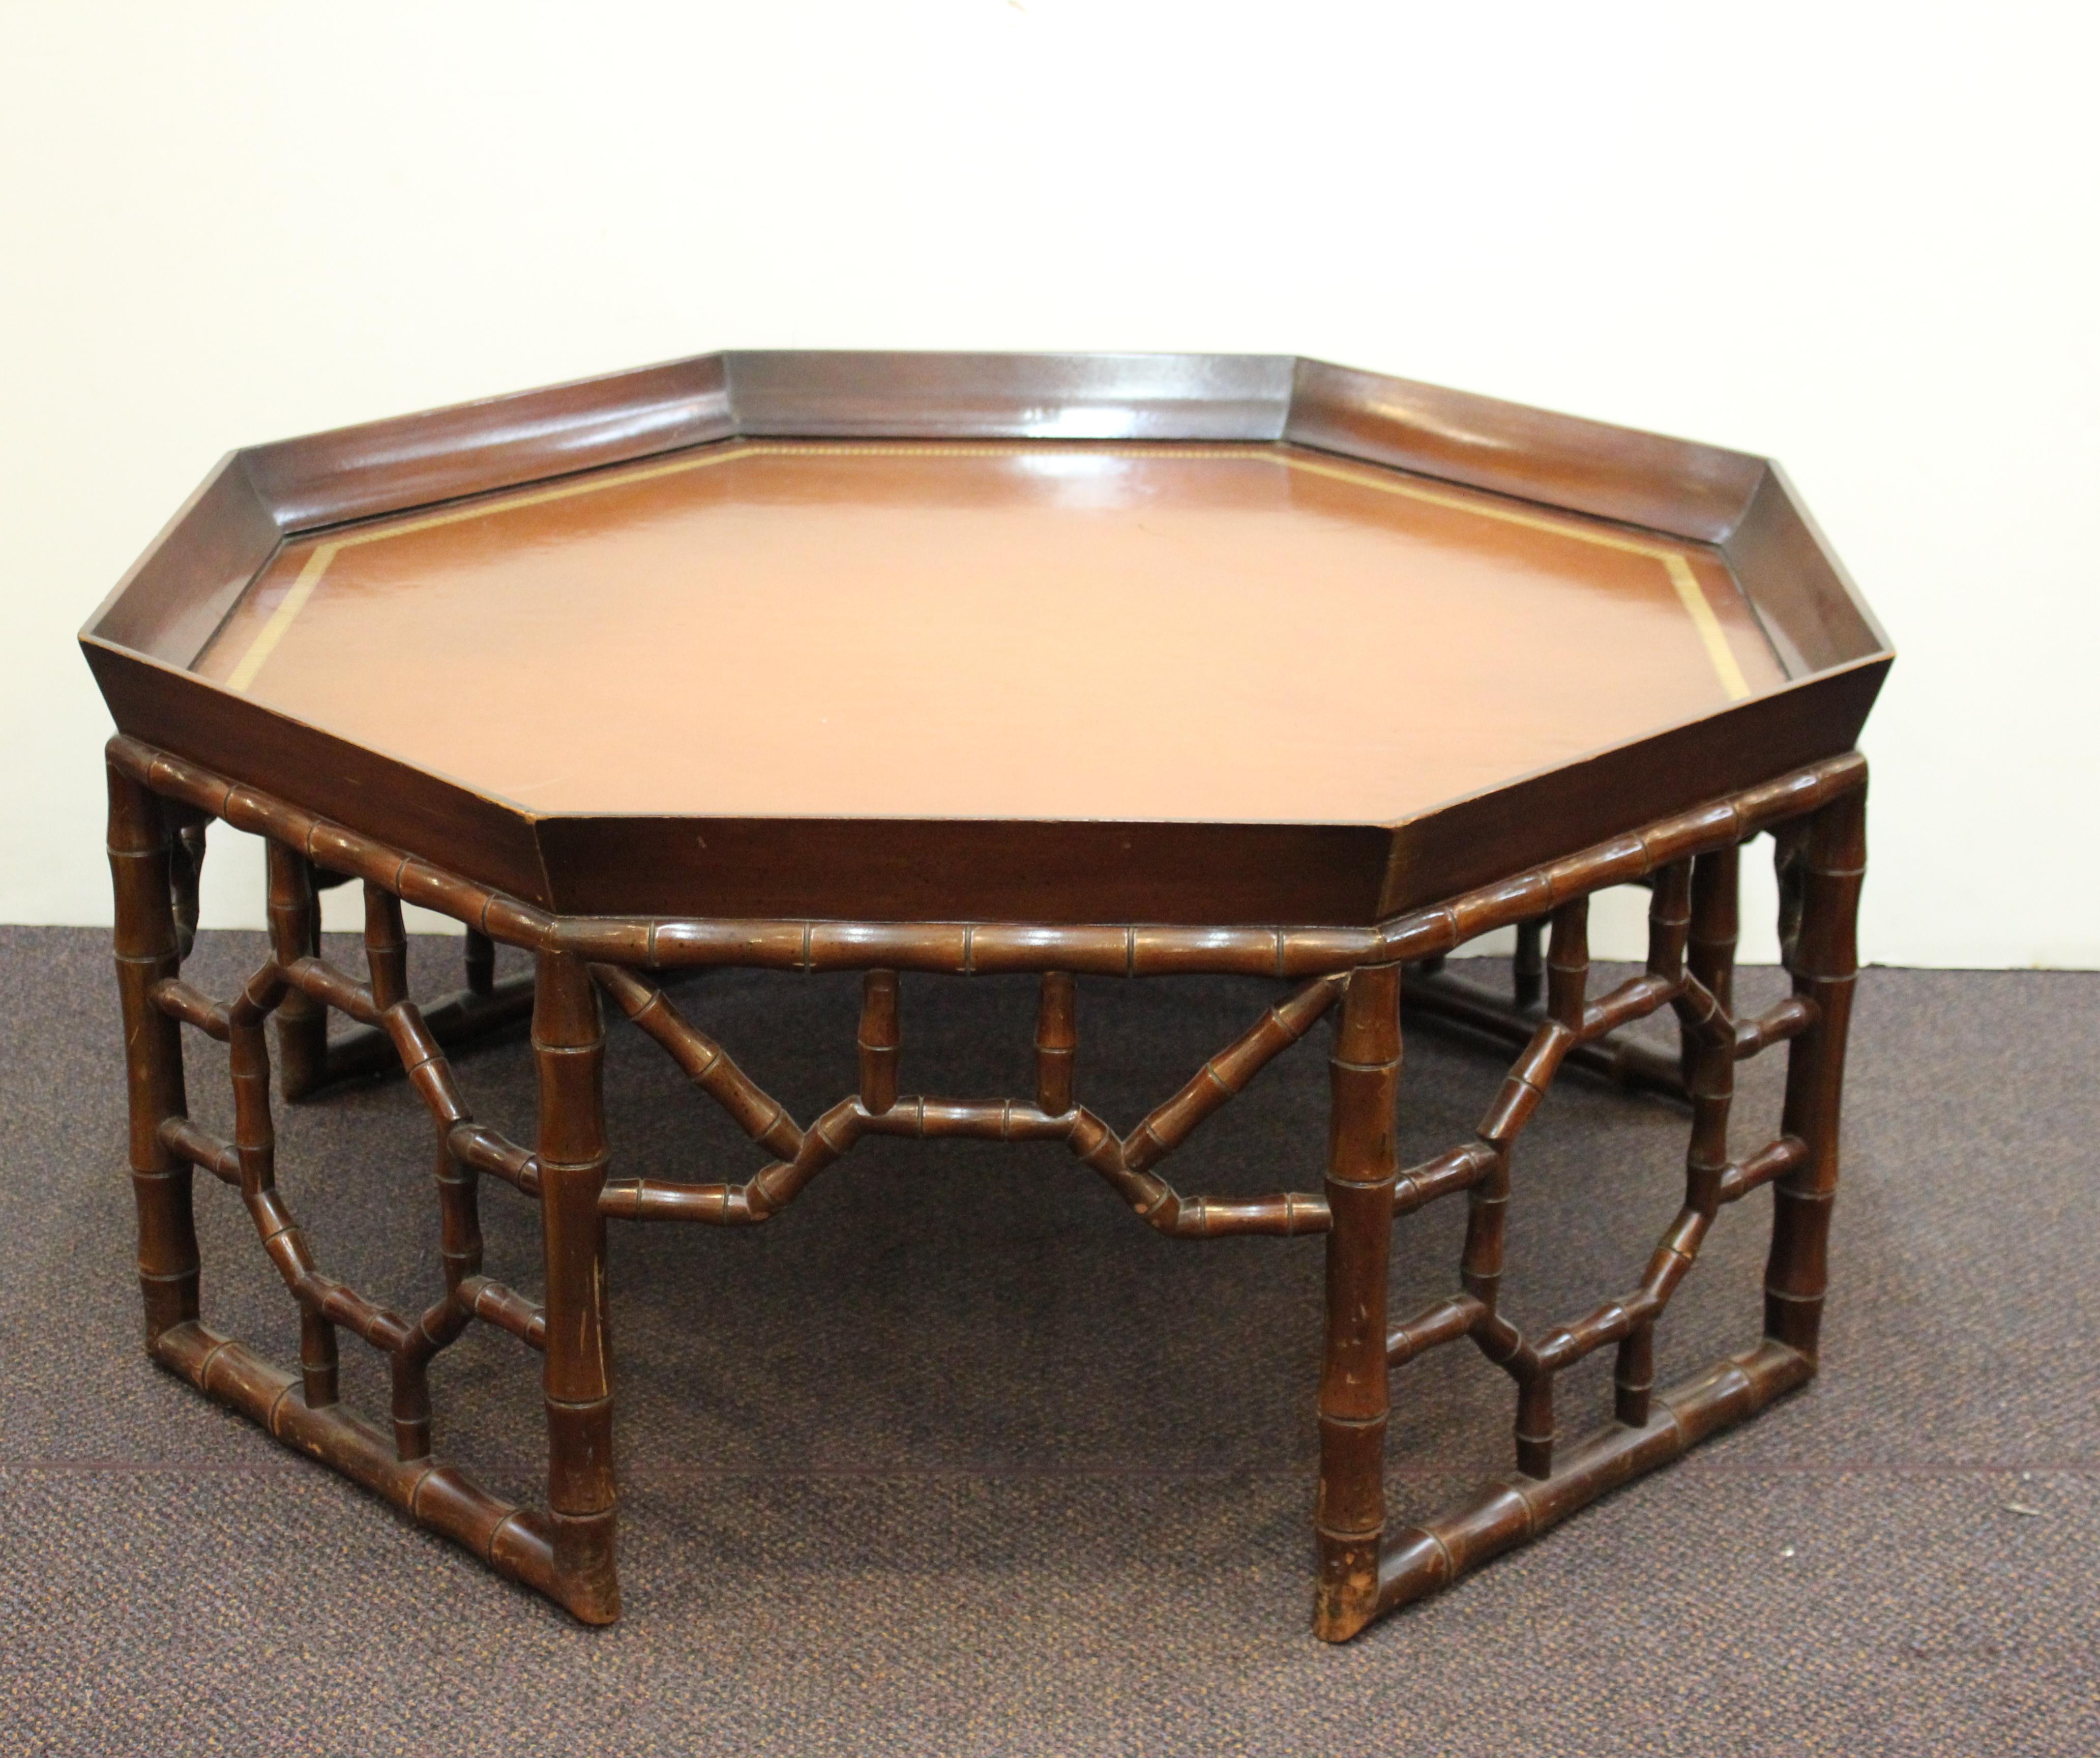 Hollywood Regency hexagonal coffee or cocktail table in faux bamboo, made by the Baker Furniture Company in the 20th century. The piece has age-appropriate wear and is in great vintage condition.